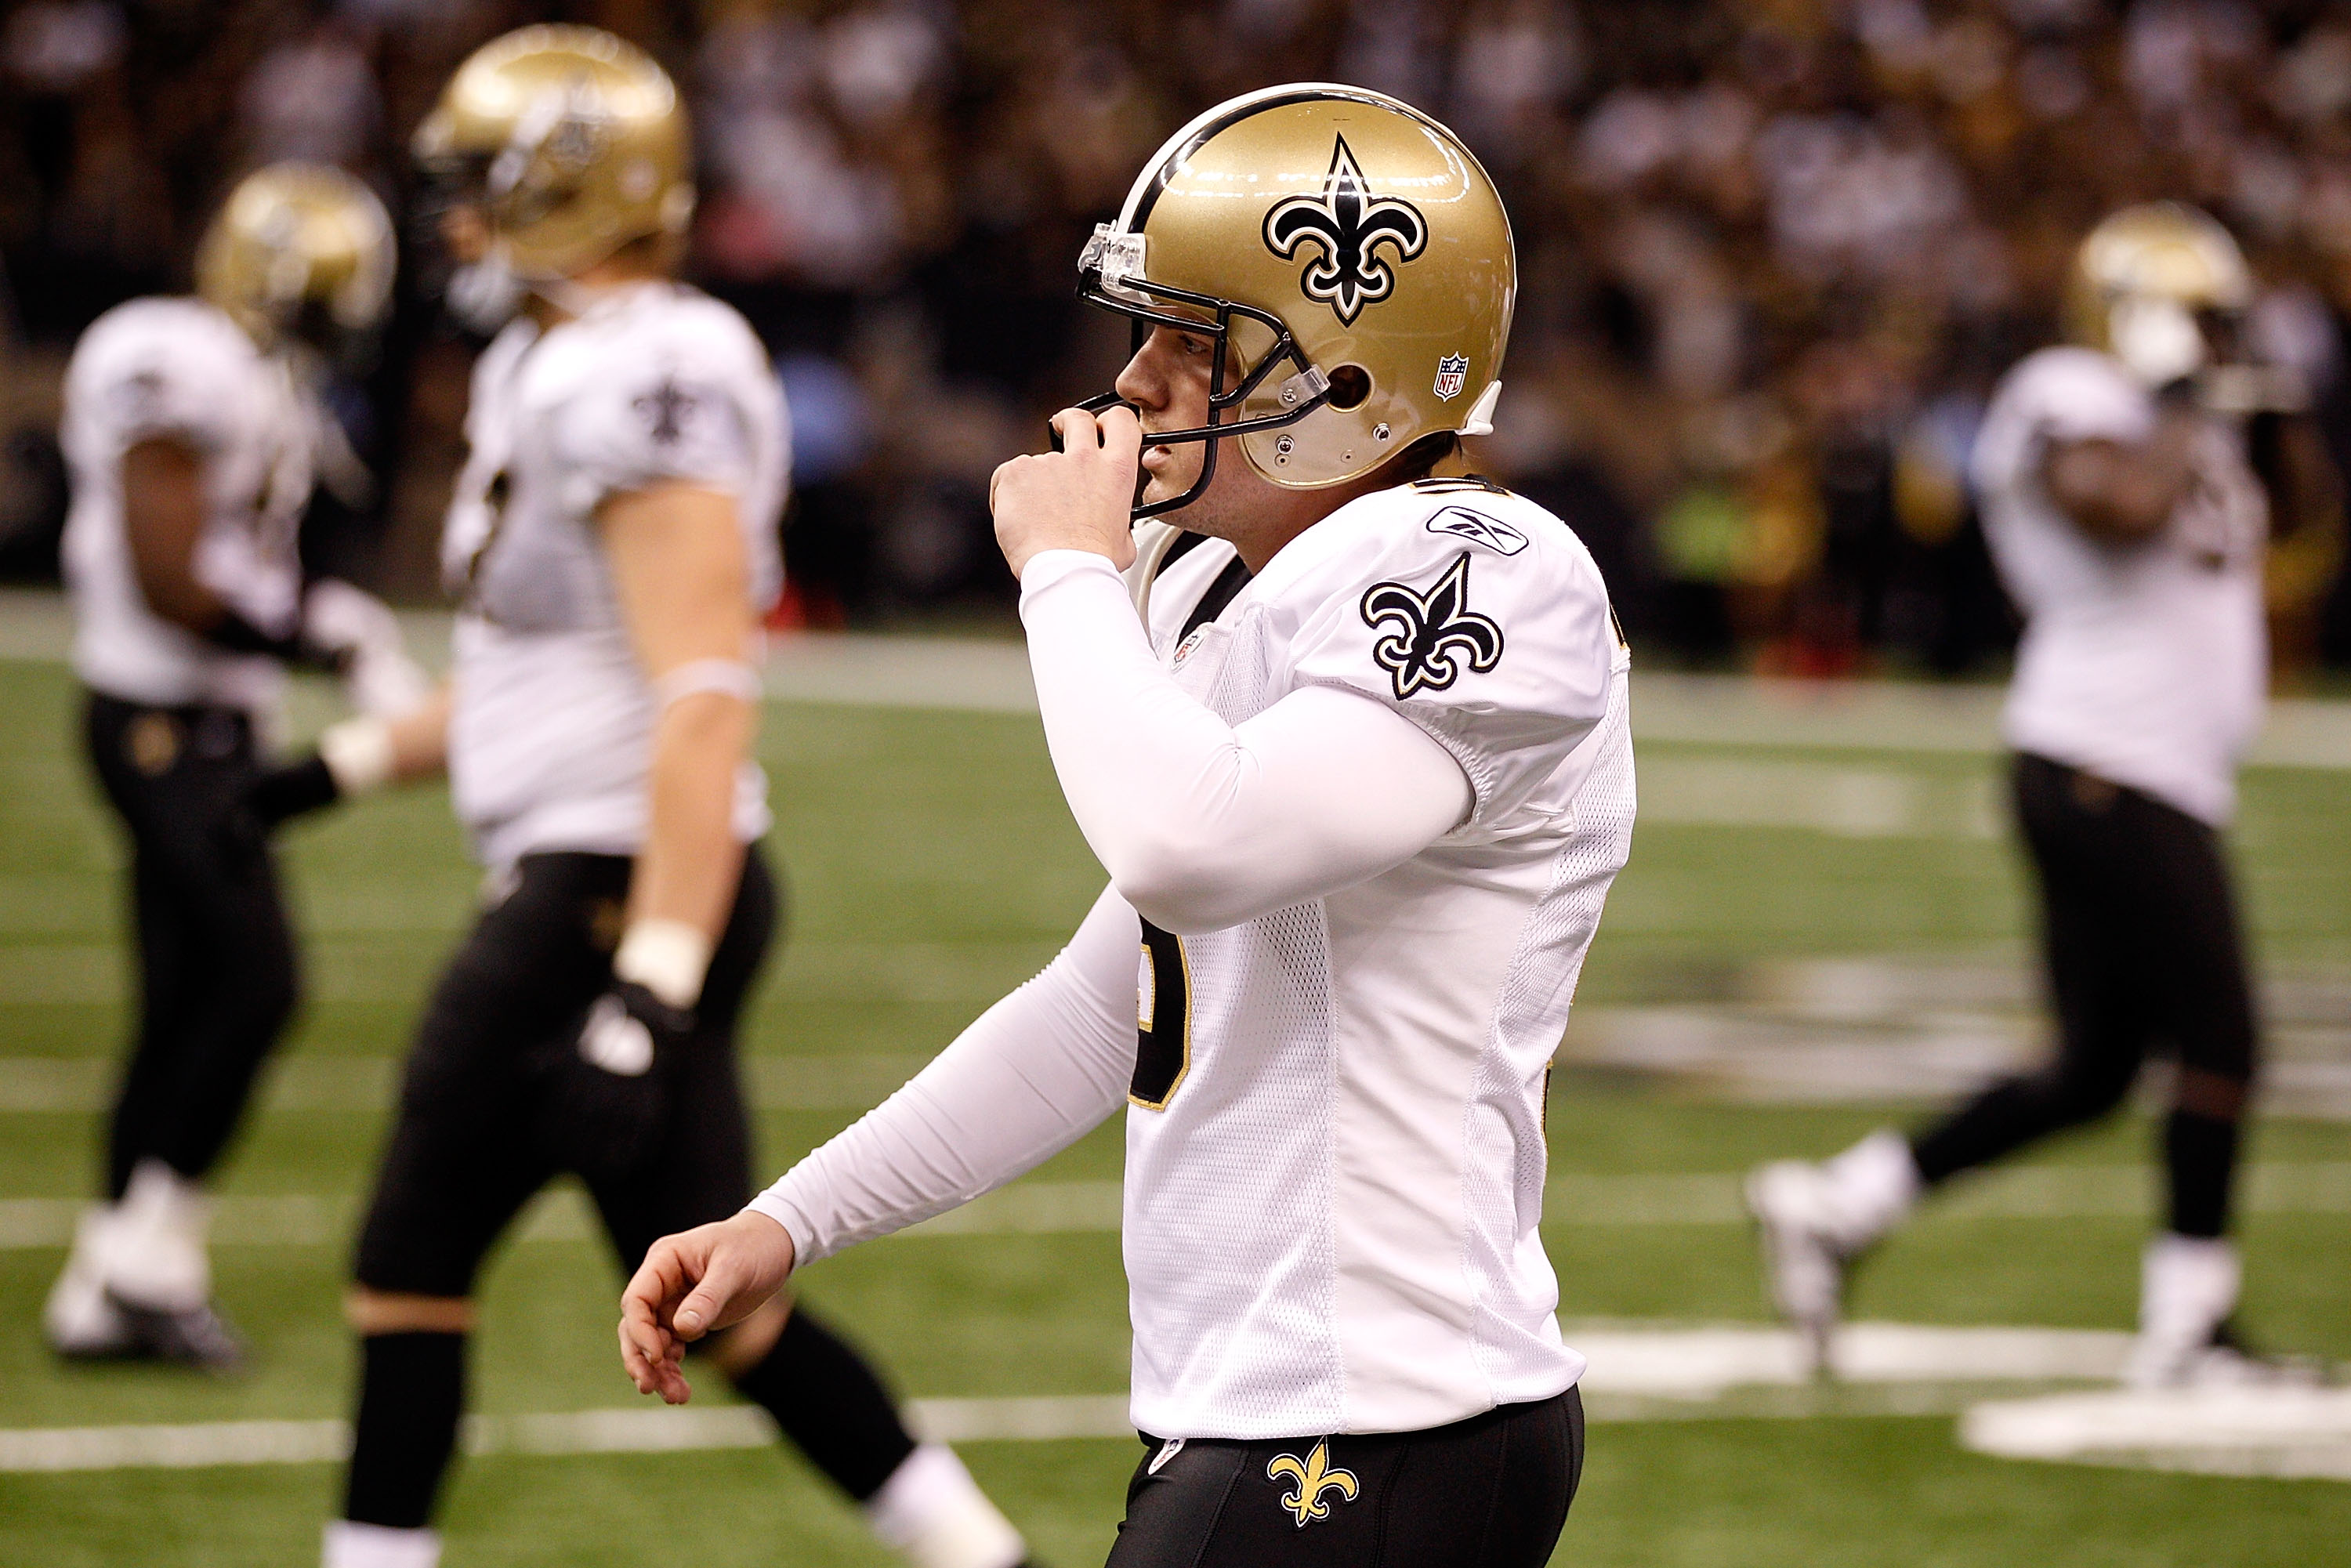 NEW ORLEANS - SEPTEMBER 26:  Garrett Hartley #5 of the New Orleans Saints reacts to missing a field goal in overtime against the Atlanta Falcons at the Louisiana Superdome on September 26, 2010 in New Orleans, Louisiana. The Falcons defeated the Saints 27